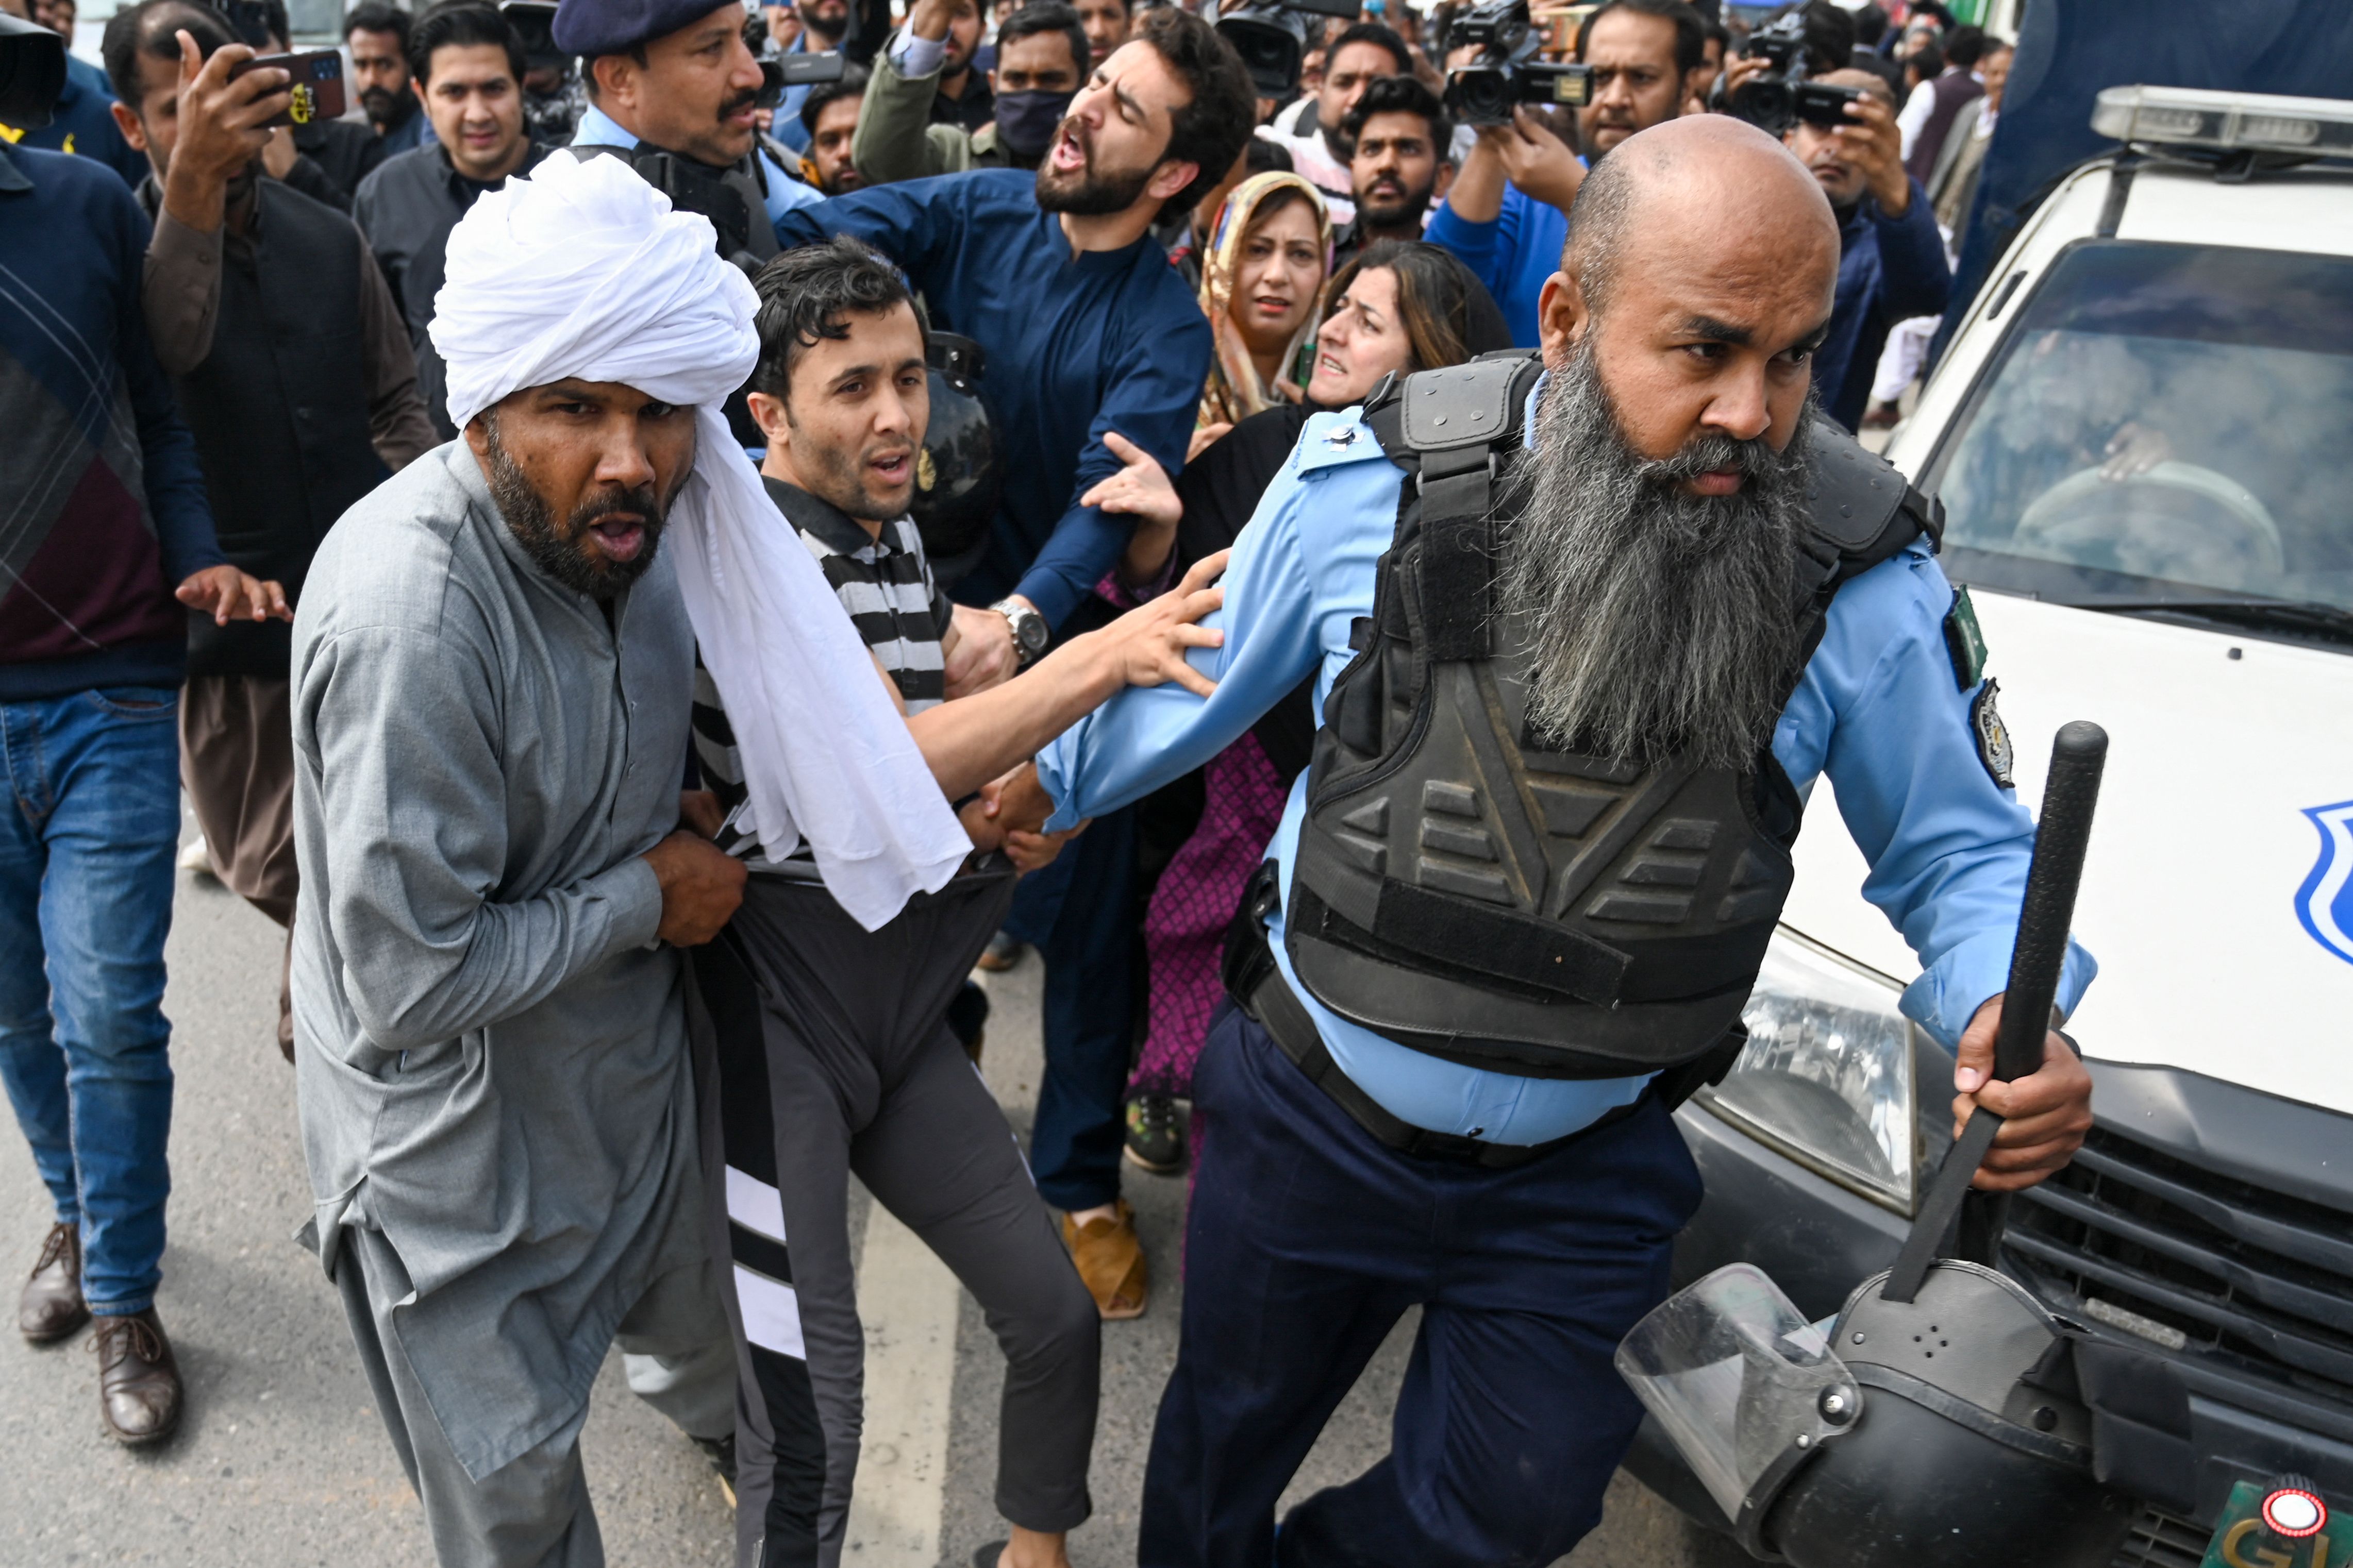 Meanwhile, the police also detained many people — Photo: AFP